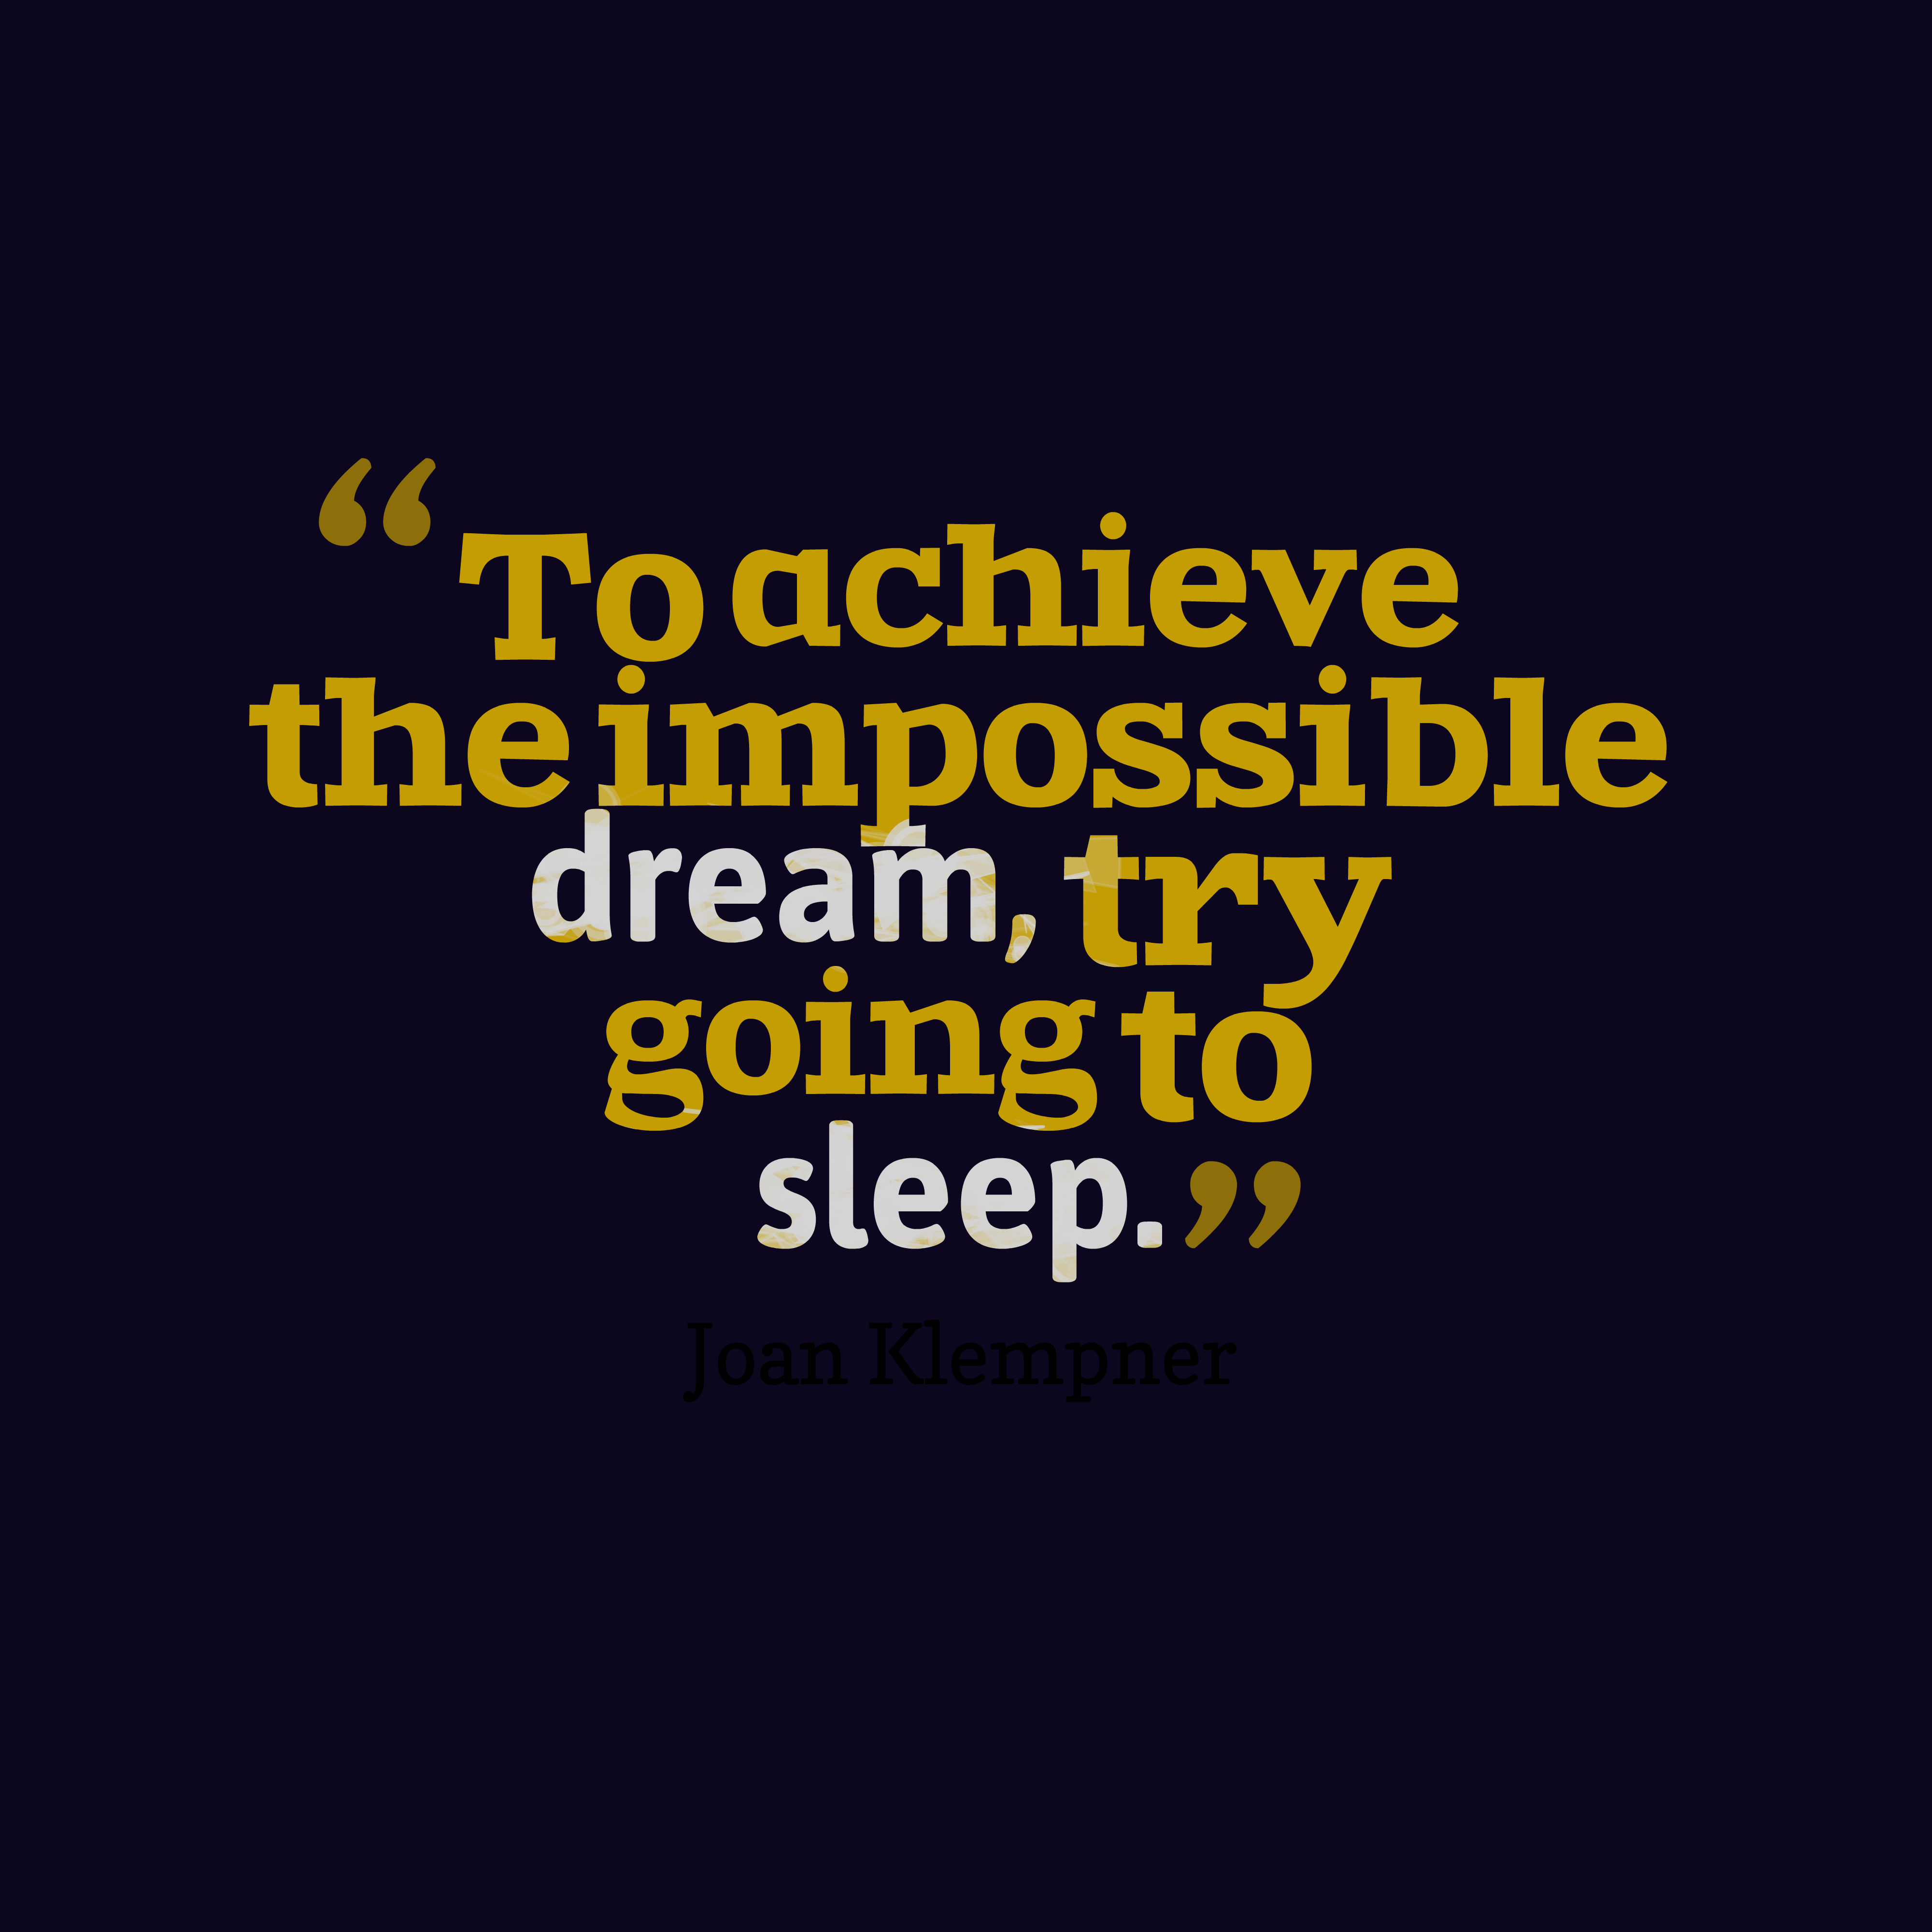 To achieve the impossible dream, try going to sleep. Joan Klempner